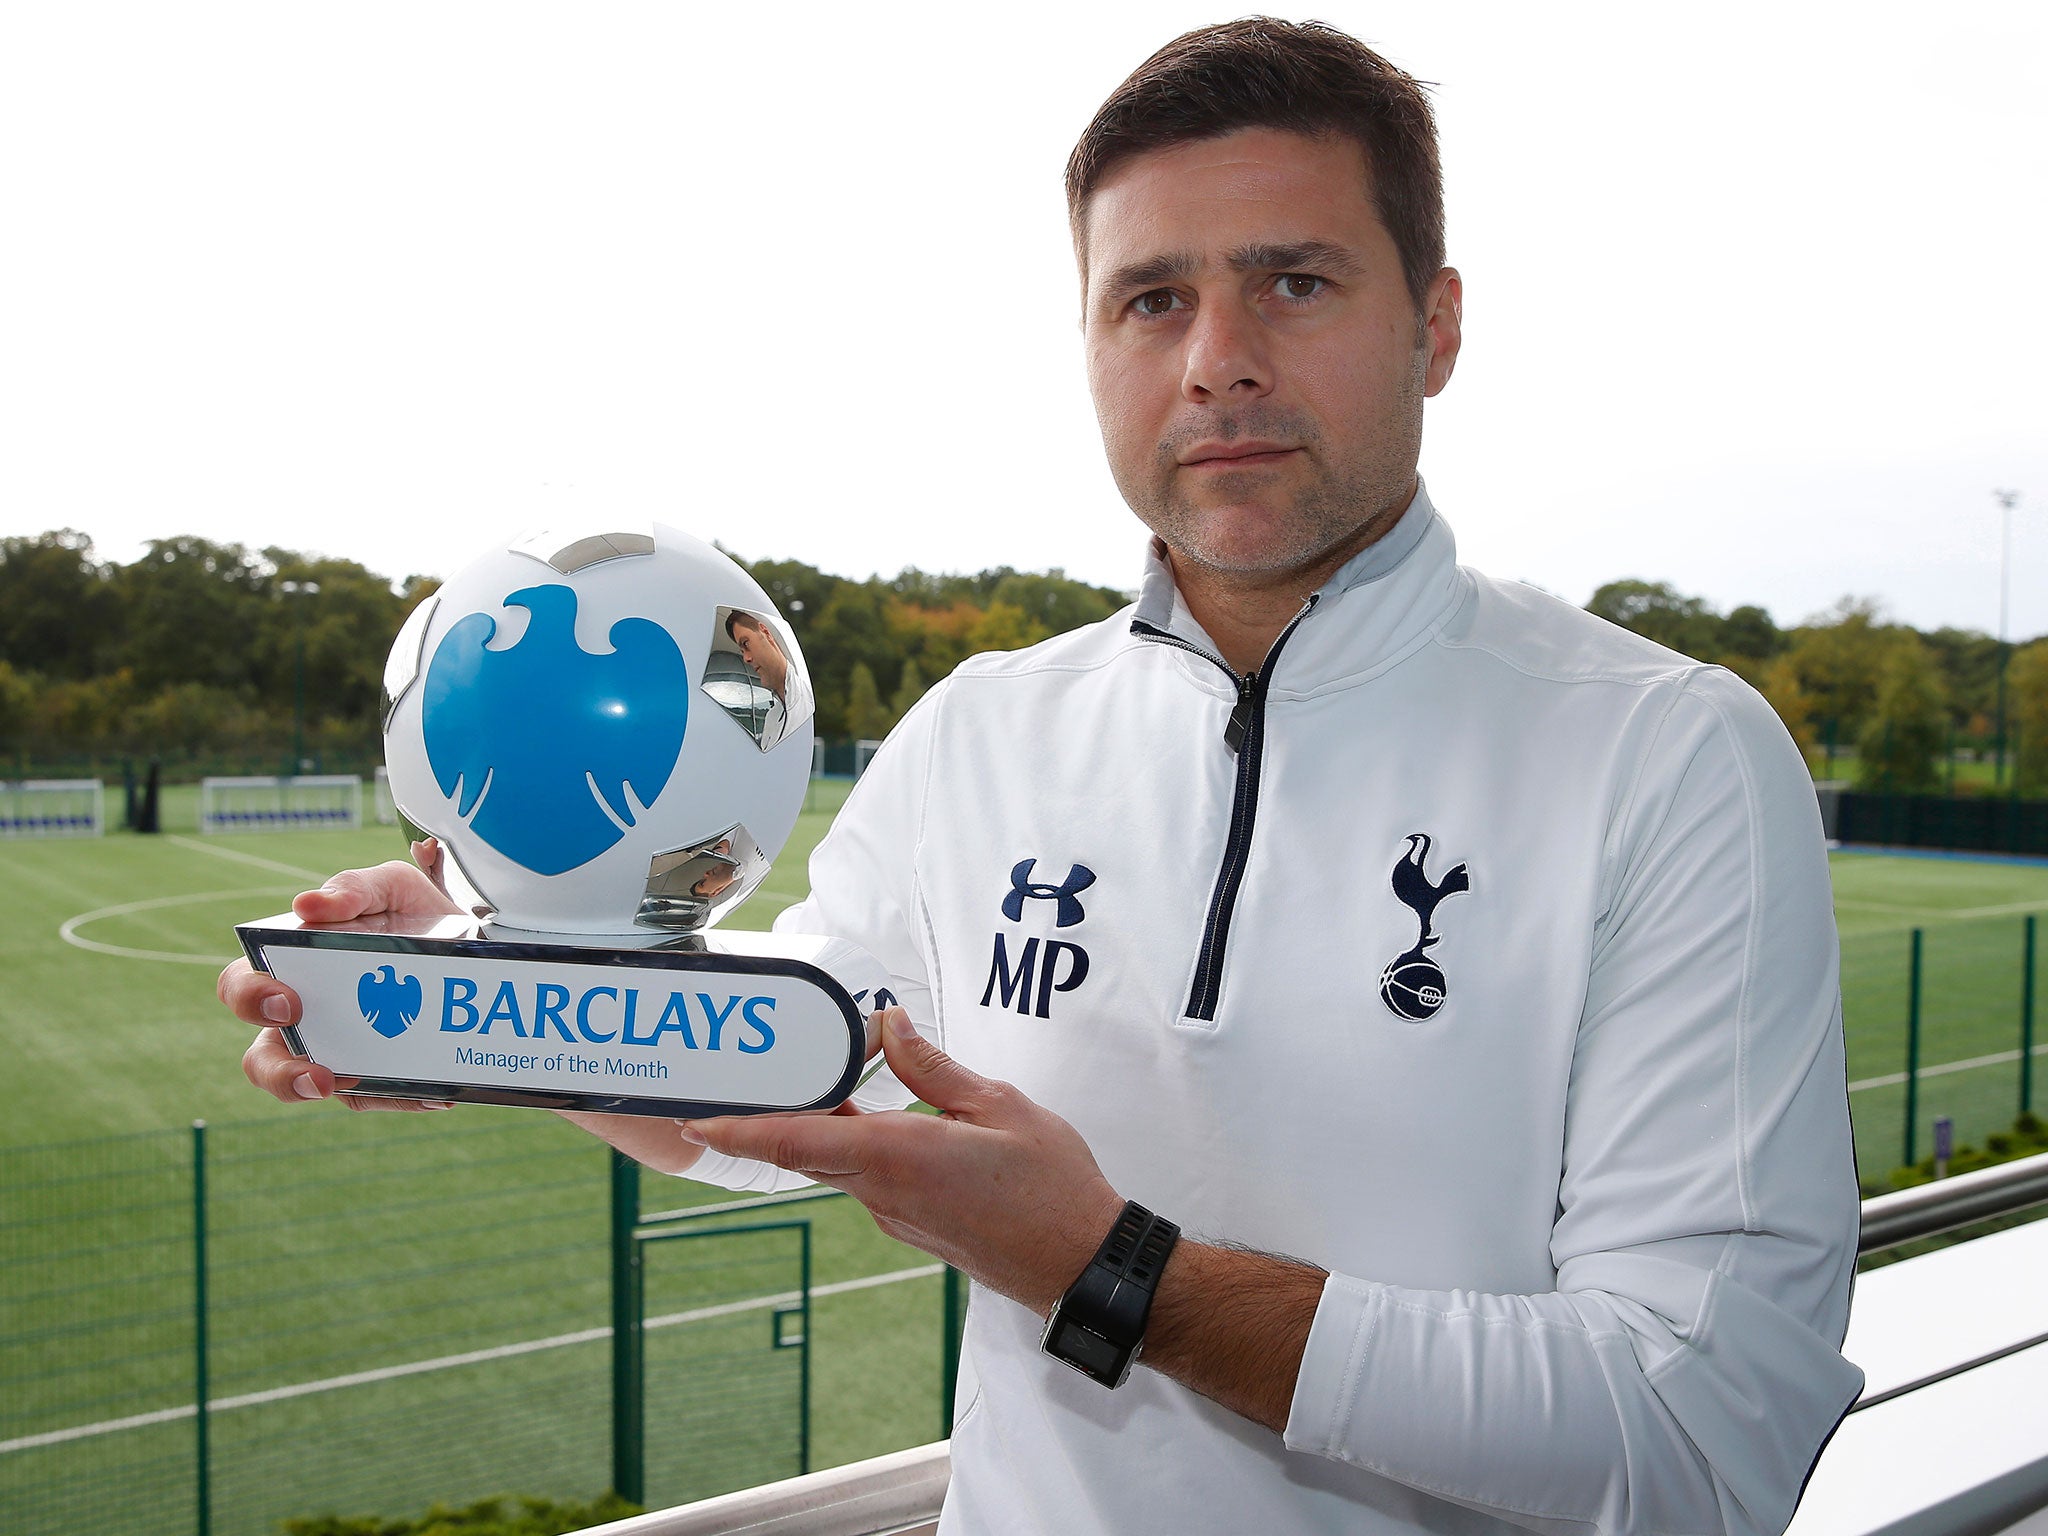 Mauricio Pochettino receives his Barclays Manager of the Month award for September. Voted for by the Barclays Panel - a group of former players, journalists and key football stakeholders